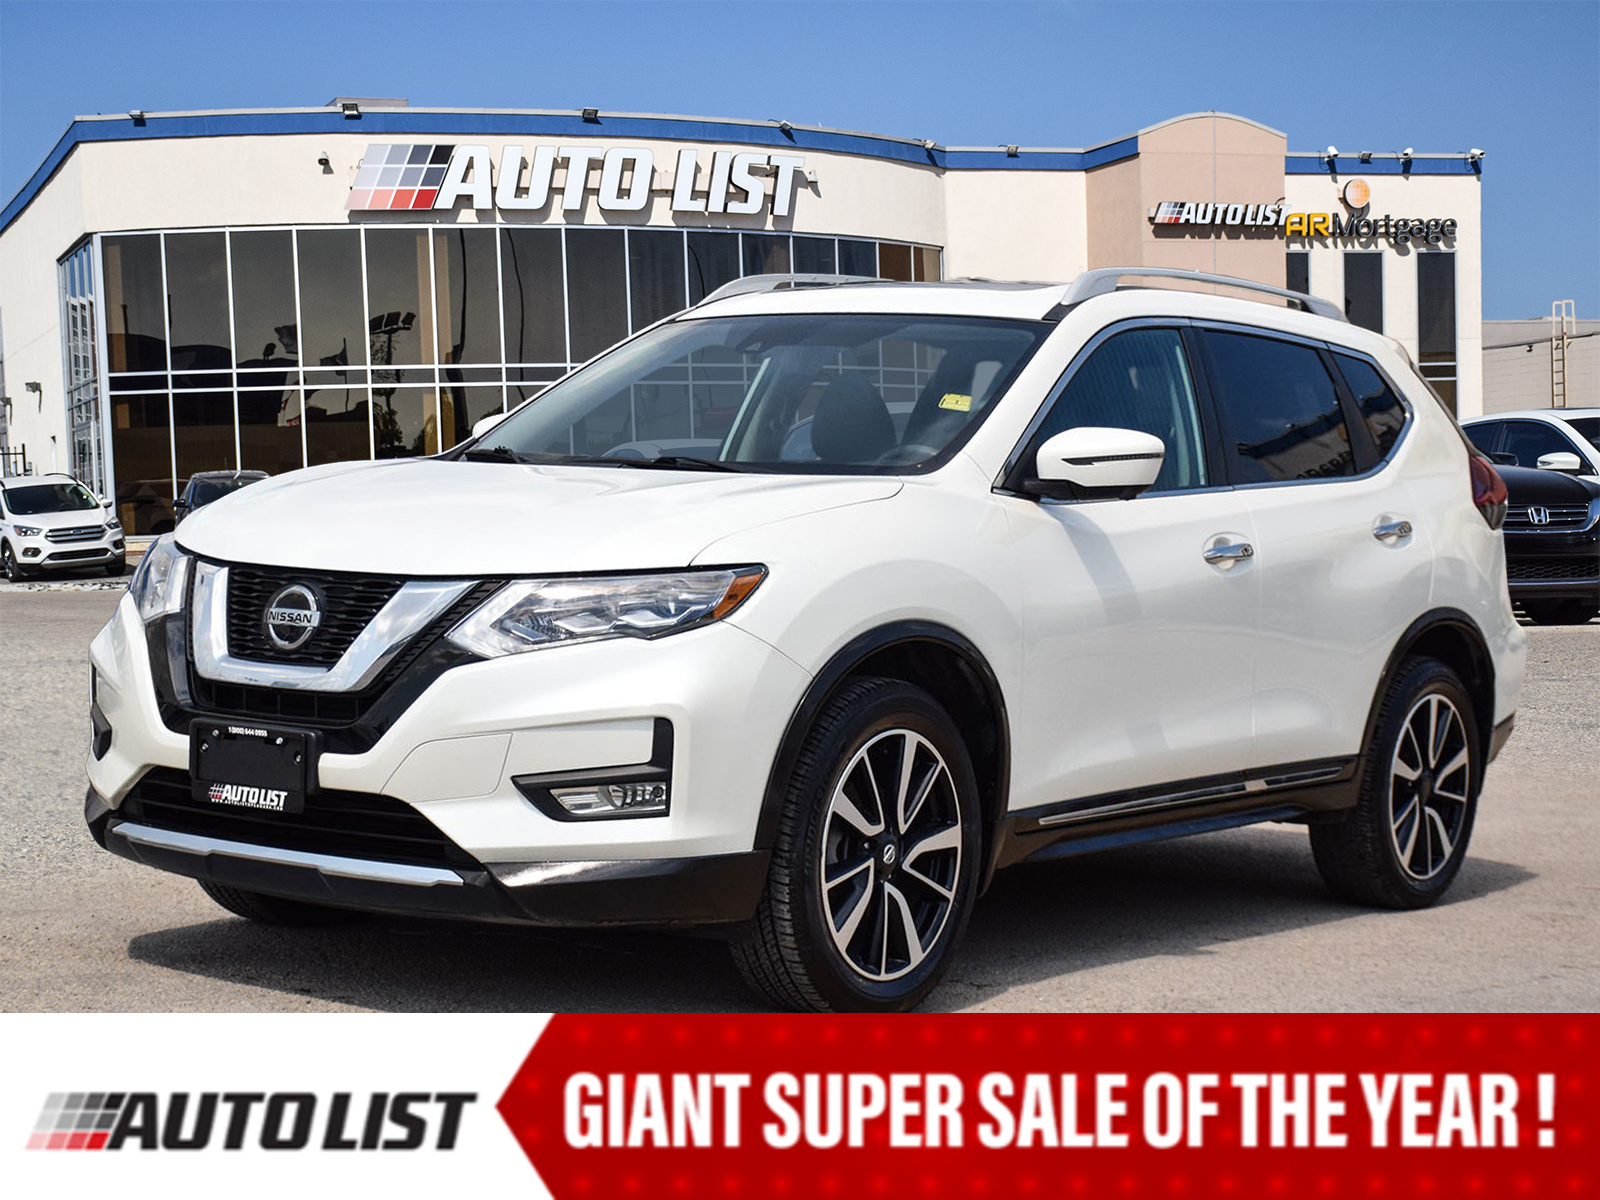 2018 Nissan Rogue SL AWD*NAVIGATION*PANOROOF*LEATHER*CHROME ALLOYS*